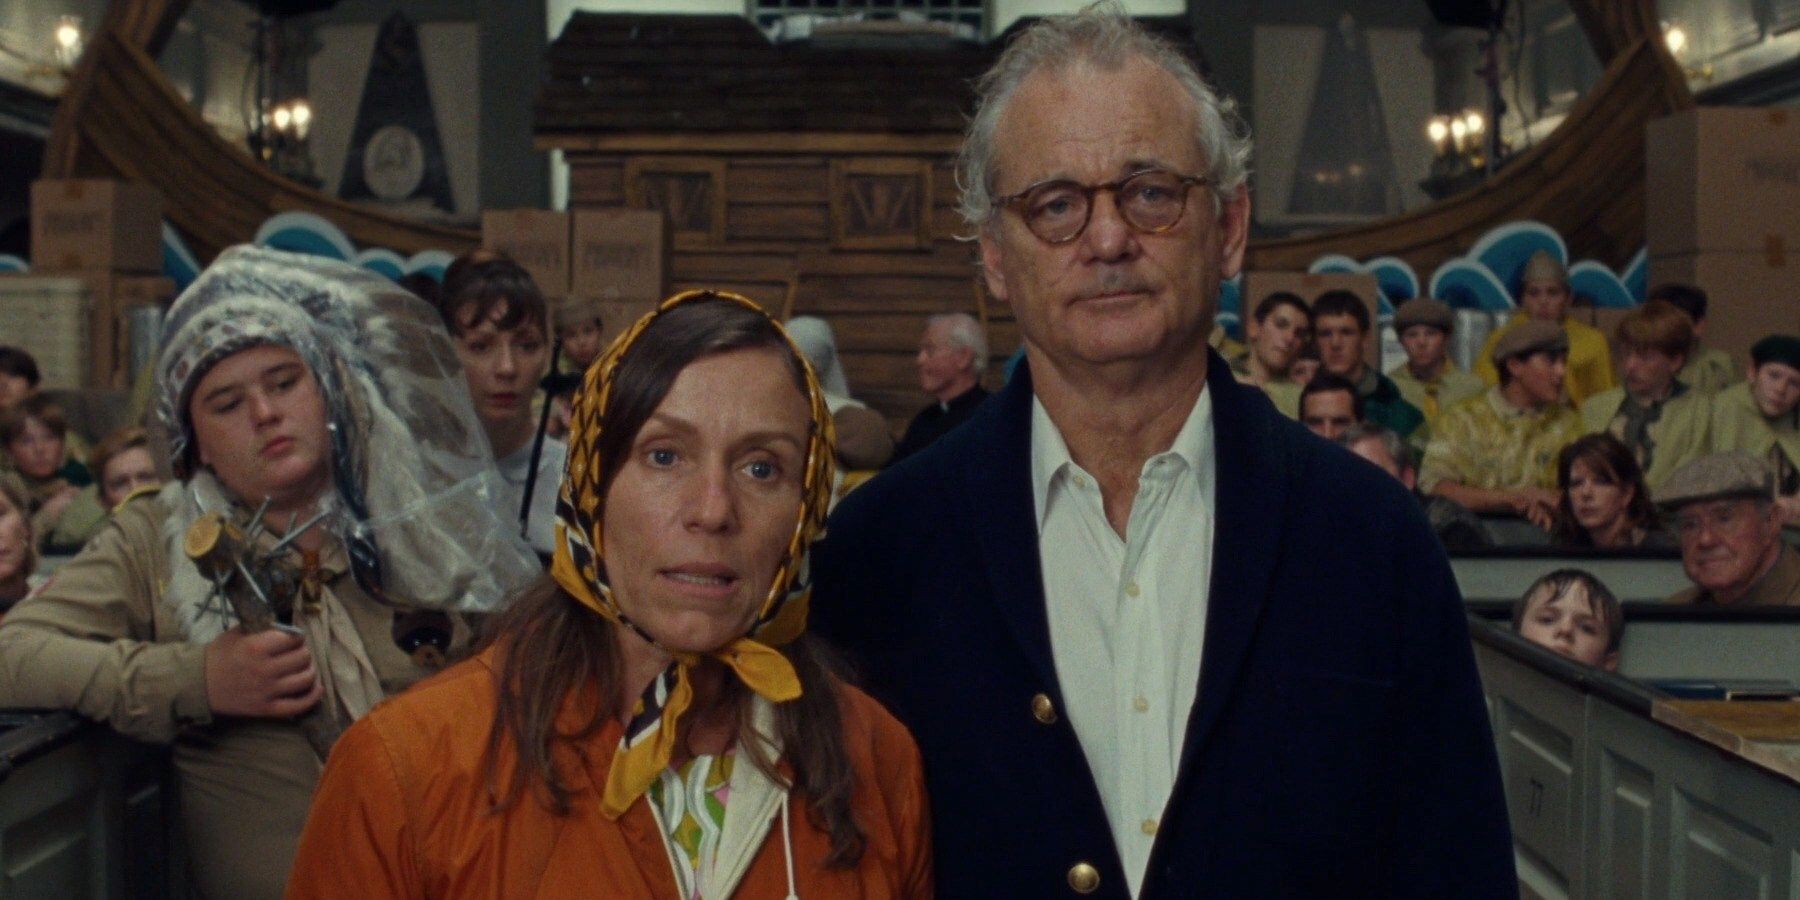 Frances McDormand and Bill Murray stand in the campground in Moonrise Kingdom.